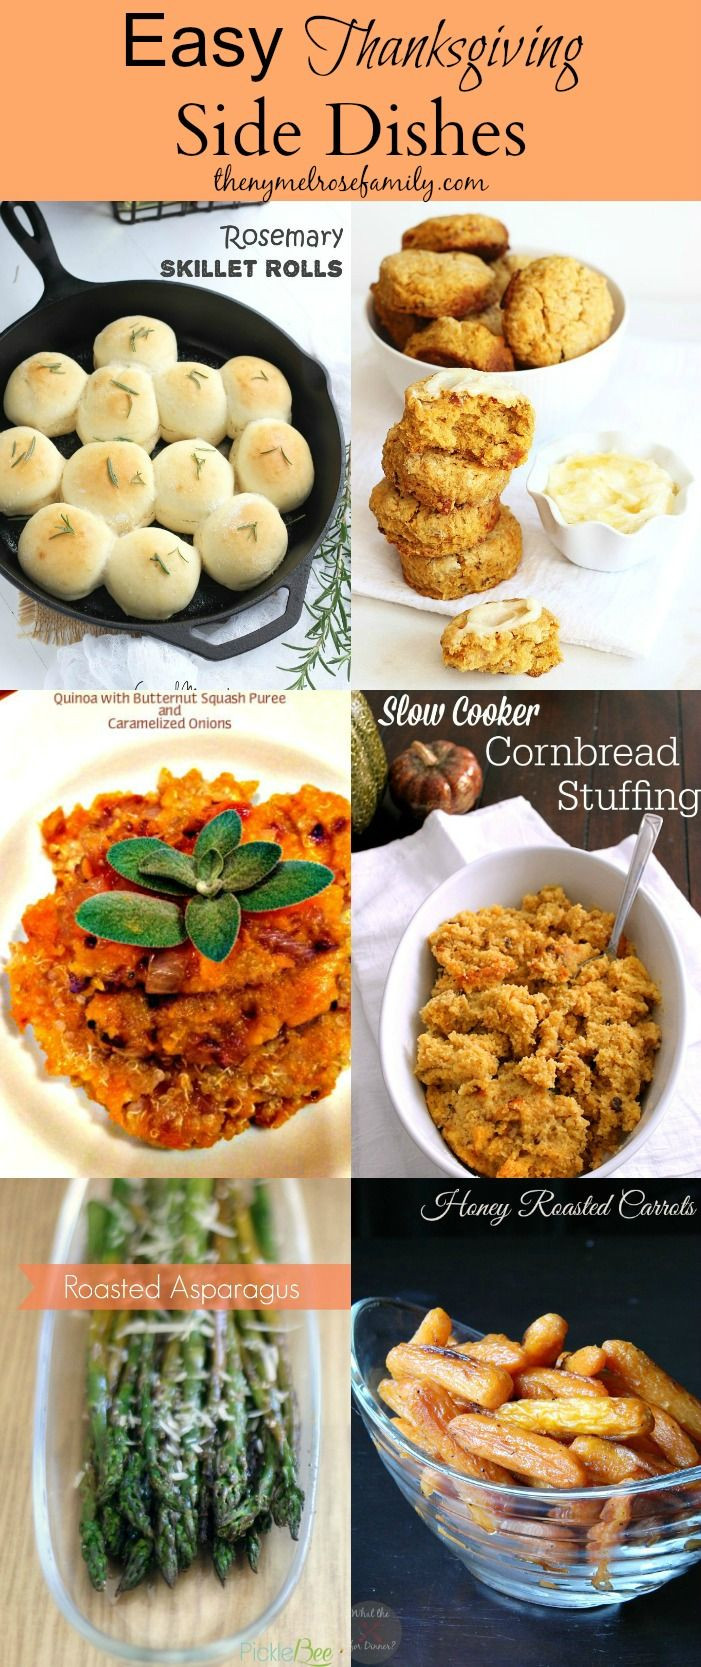 Thanksgiving Side Dishes Easy
 199 best images about Easy Thanksgiving Recipes & Crafts